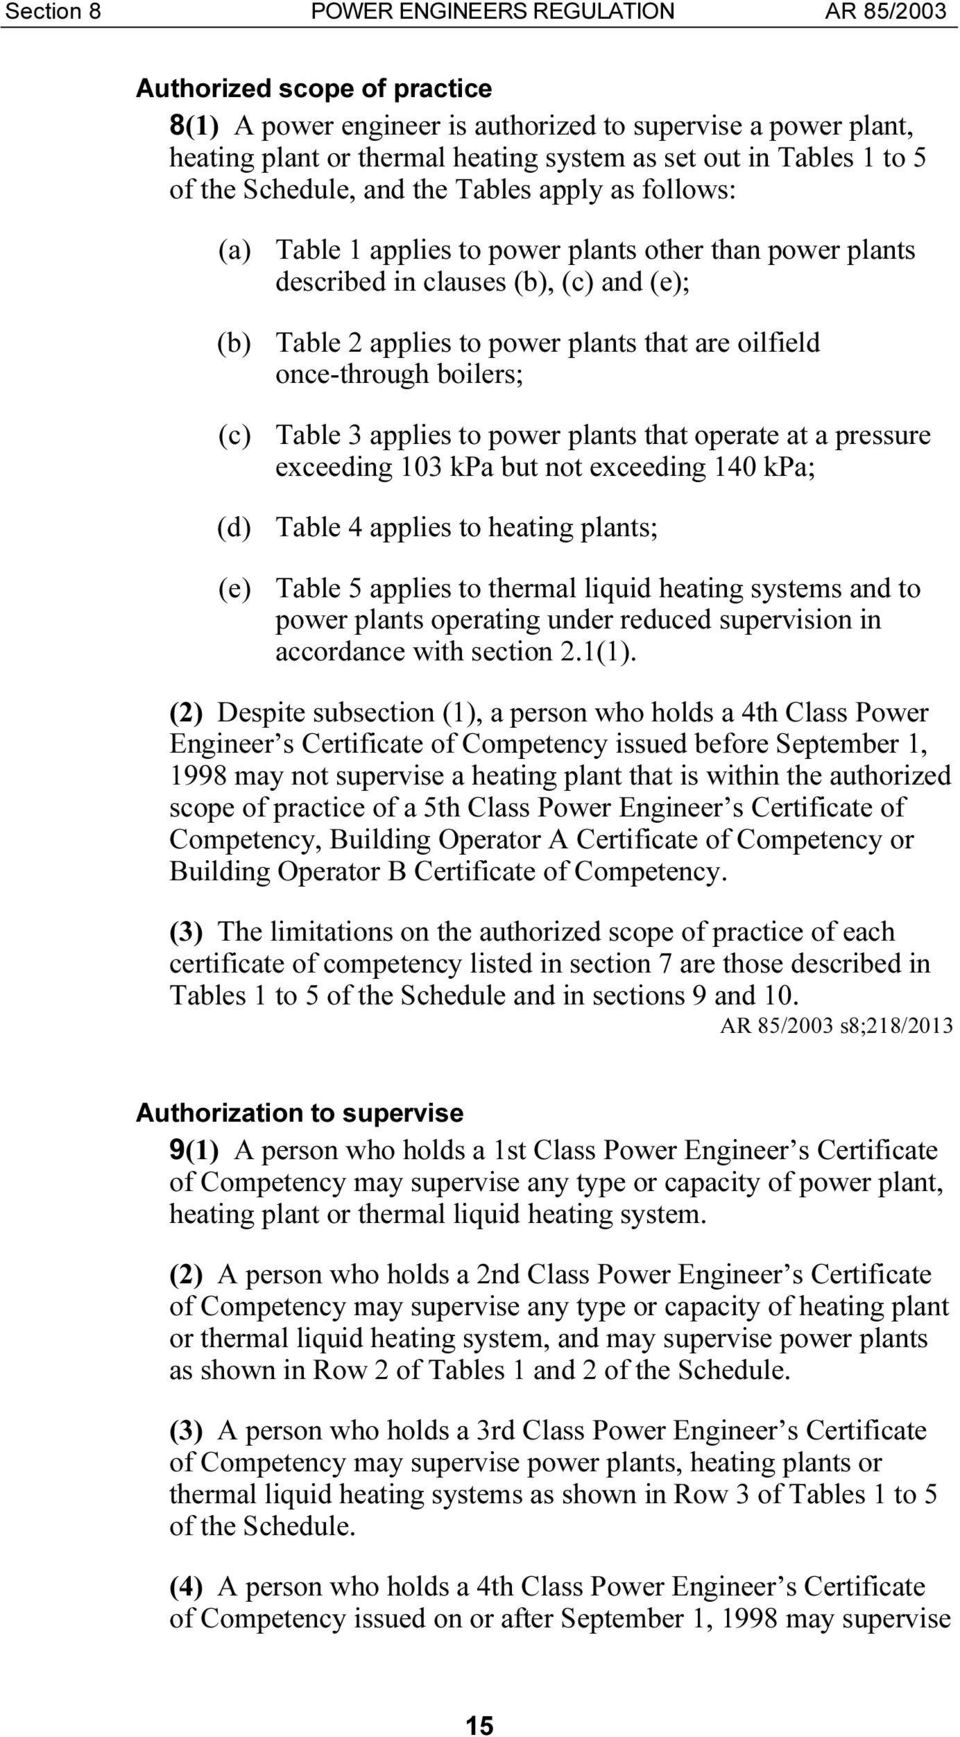 oilfield once-through boilers; (c) Table 3 applies to power plants that operate at a pressure exceeding 103 kpa but not exceeding 140 kpa; (d) Table 4 applies to heating plants; (e) Table 5 applies